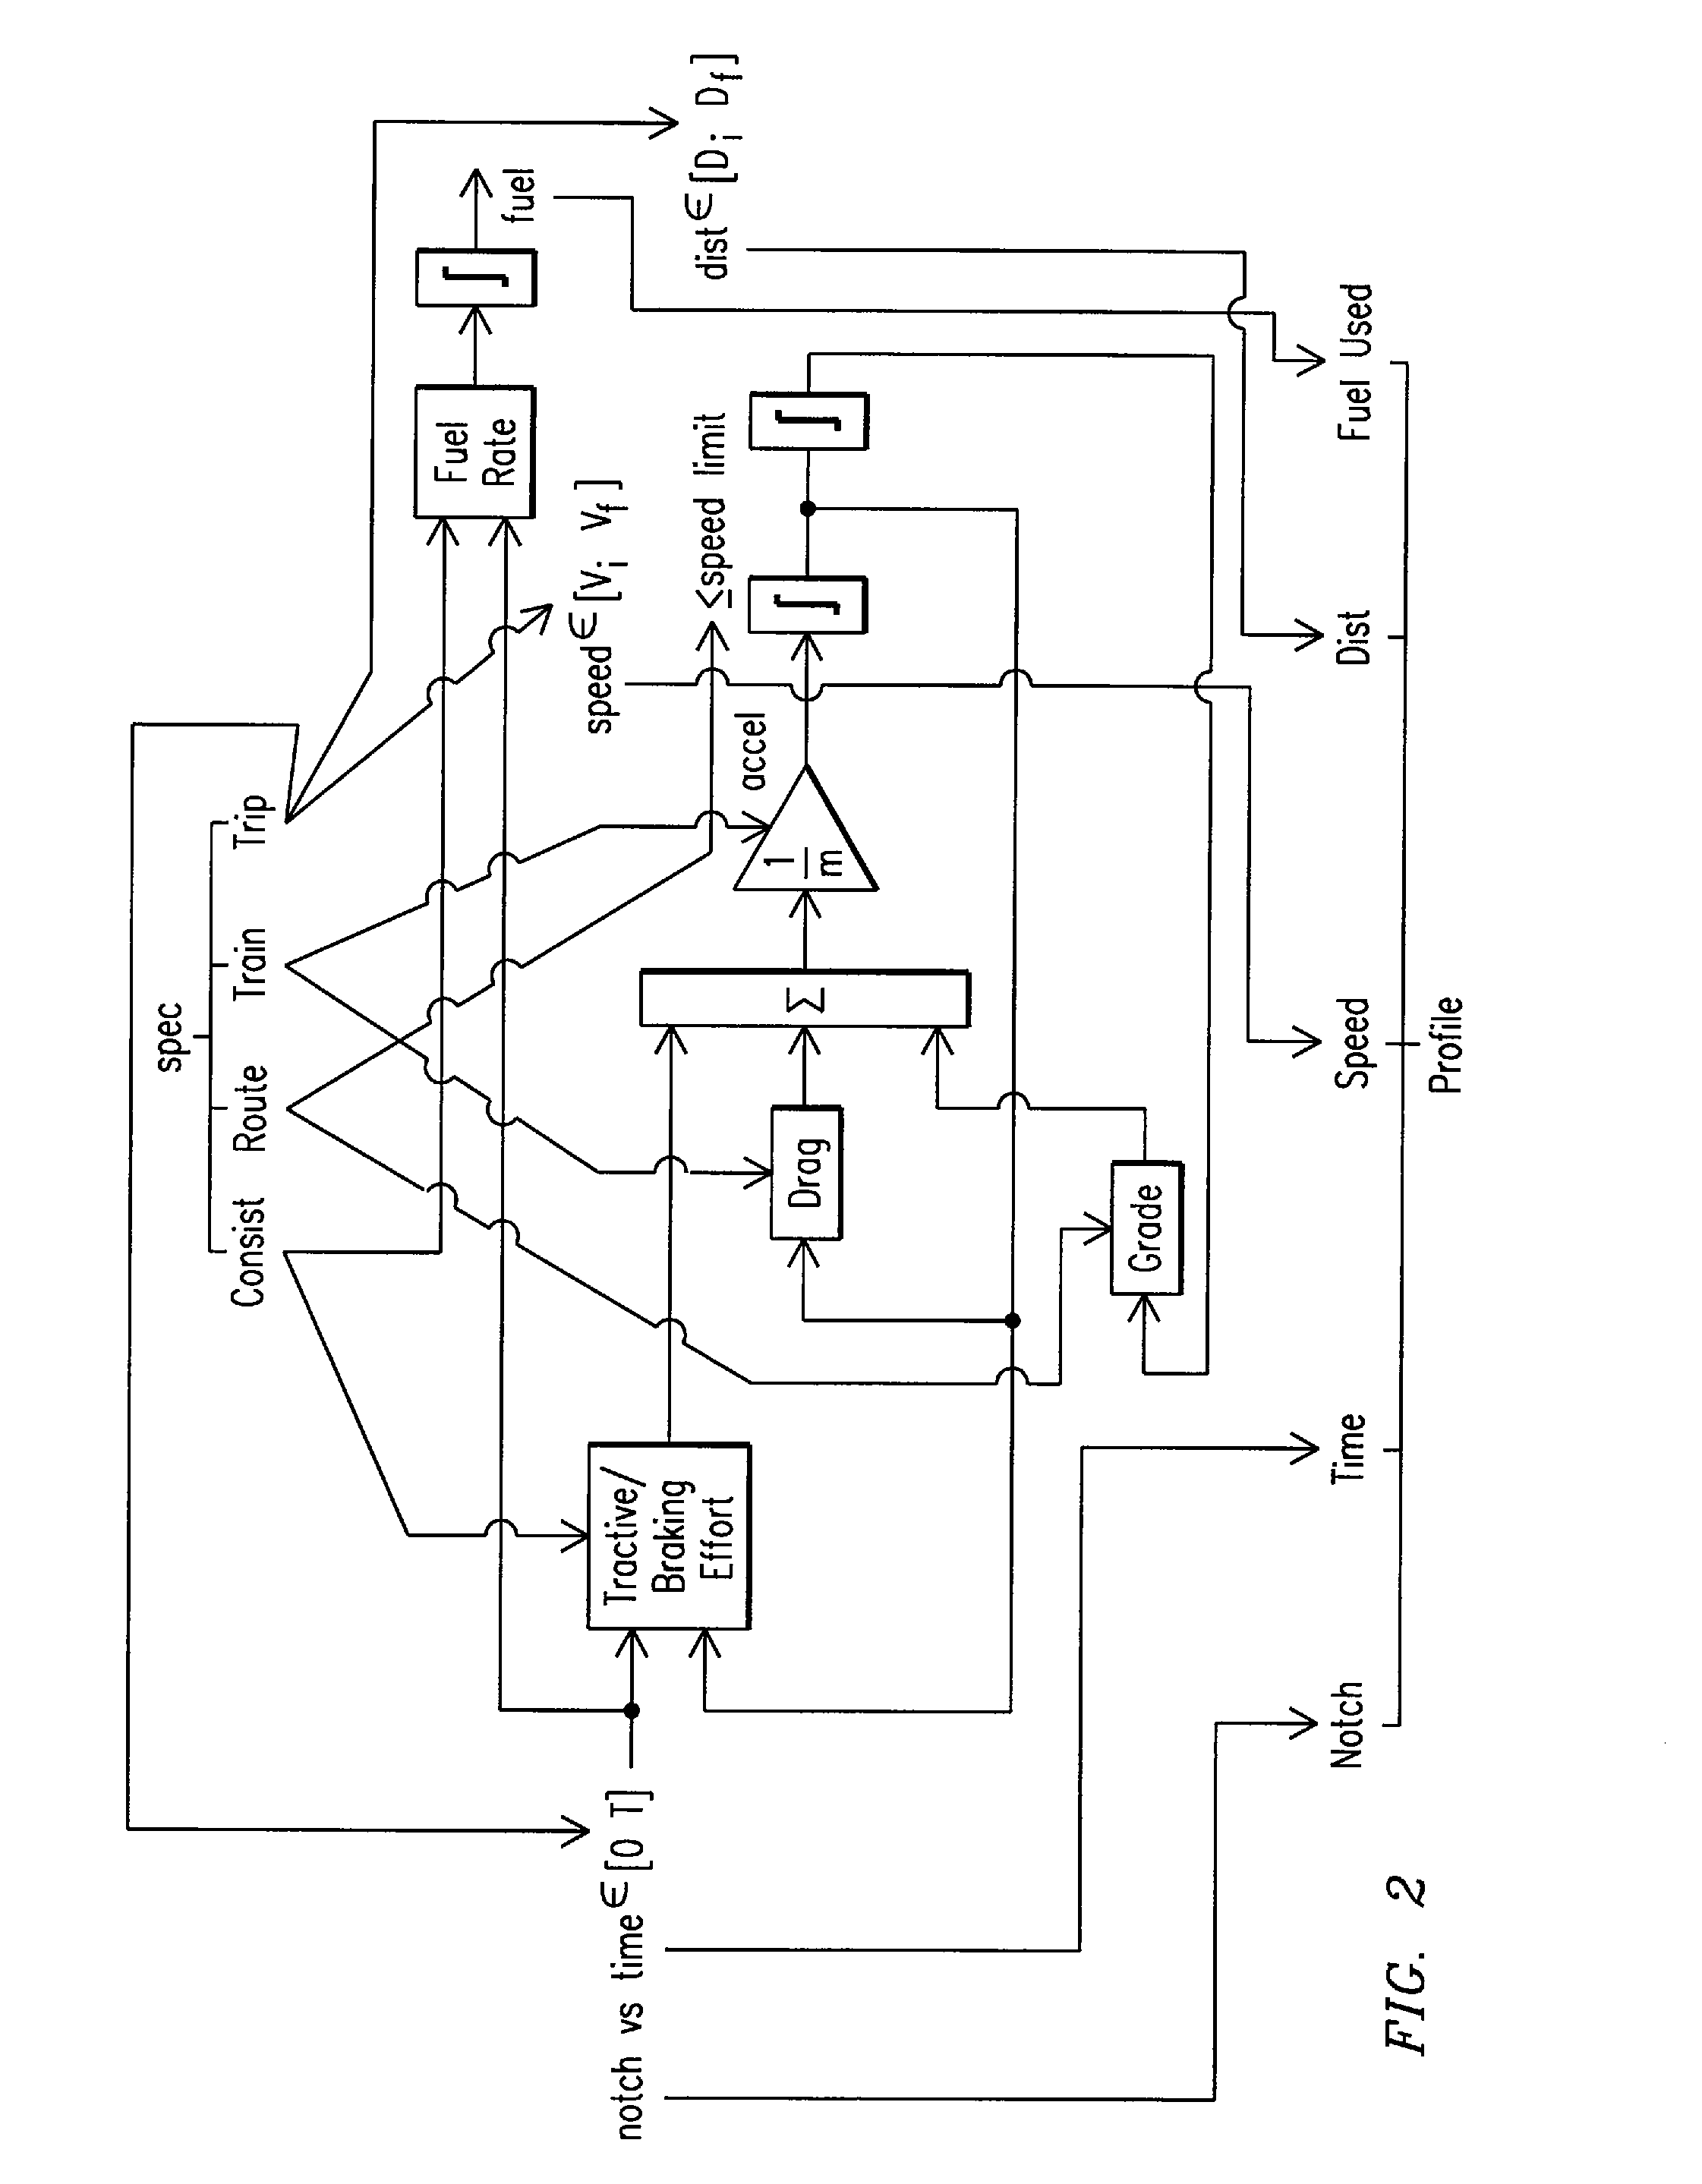 System, Method, and Computer Software Code for Instructing an Operator to Control a Powered System Having an Autonomous Controller